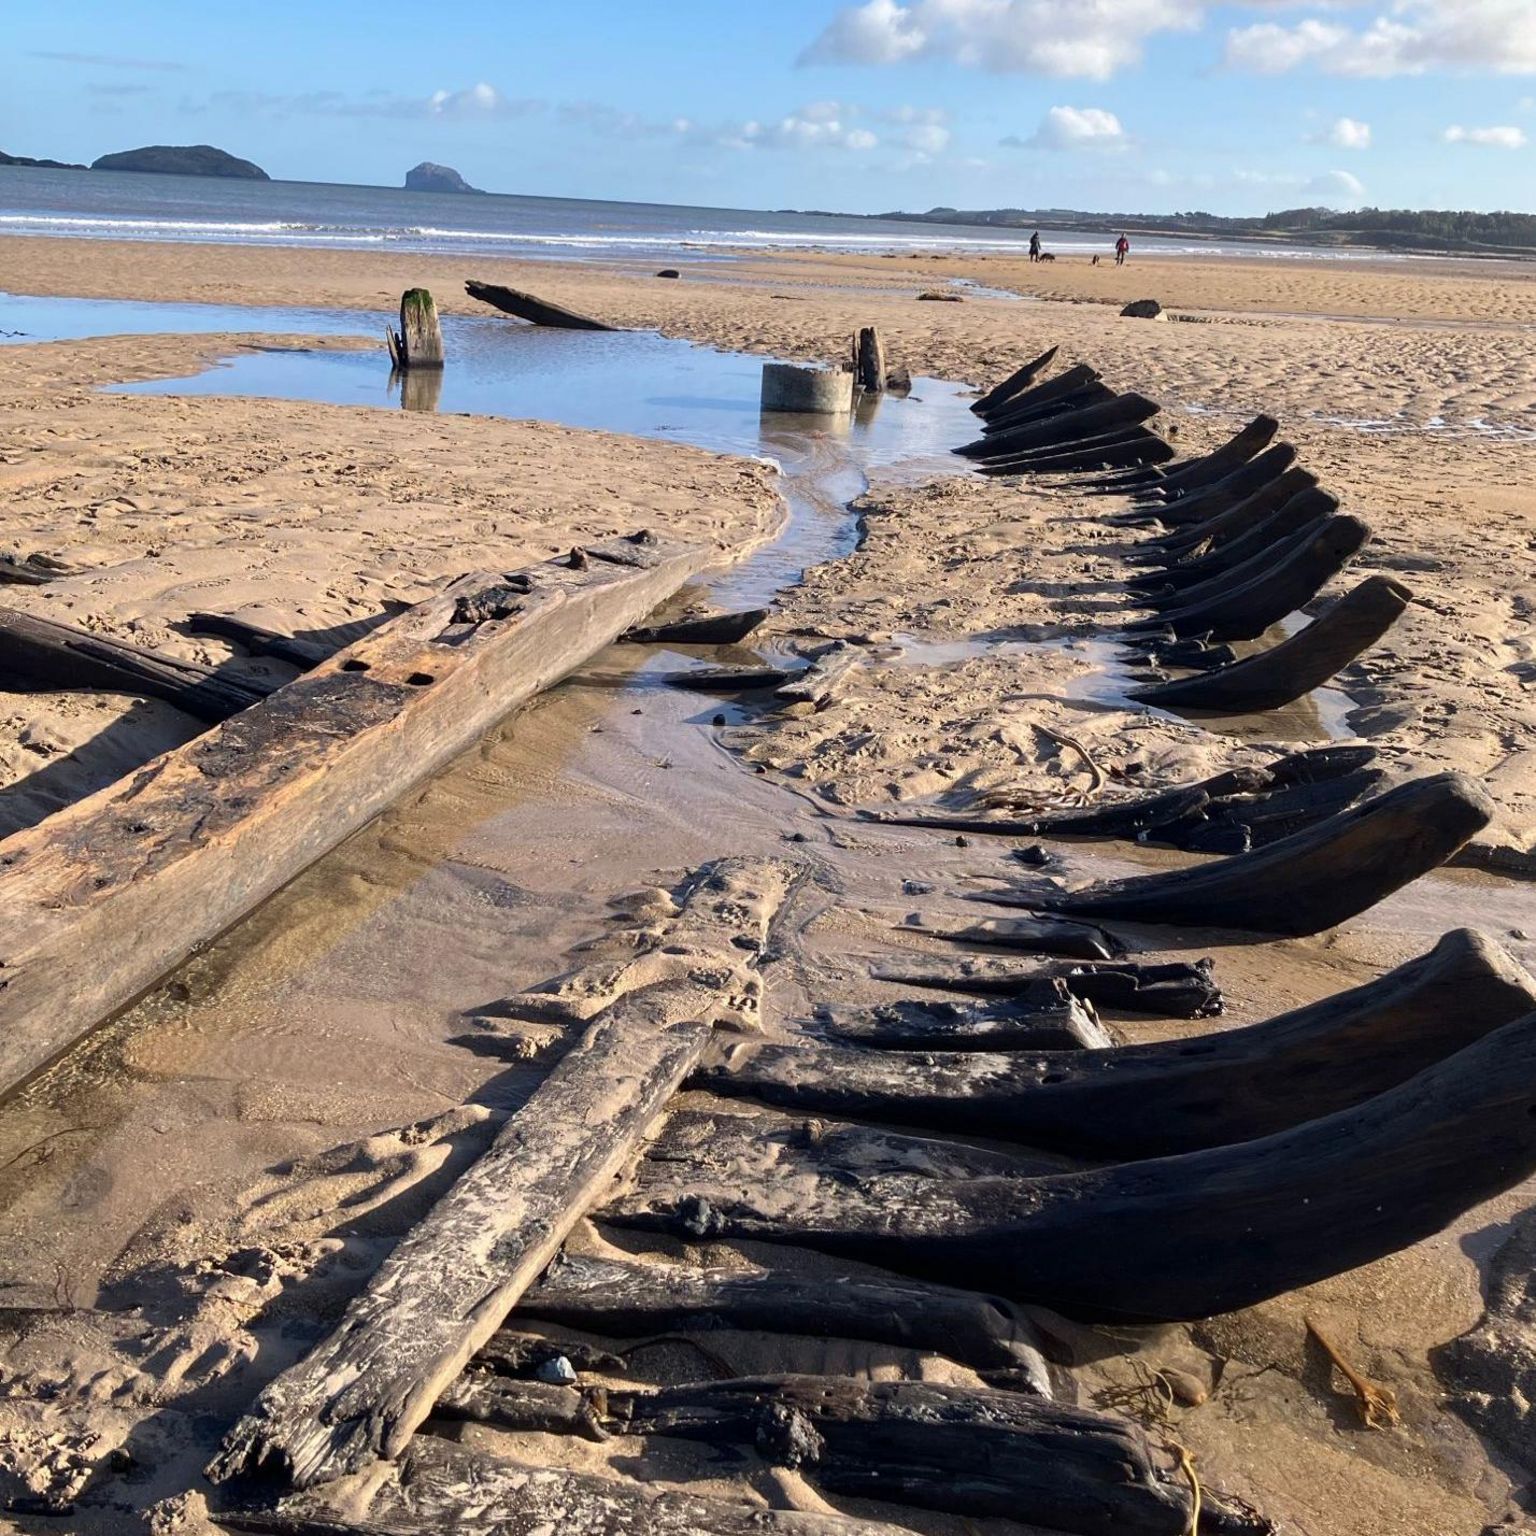 A shipwreck has been uncovered due to erosion at Broadsands